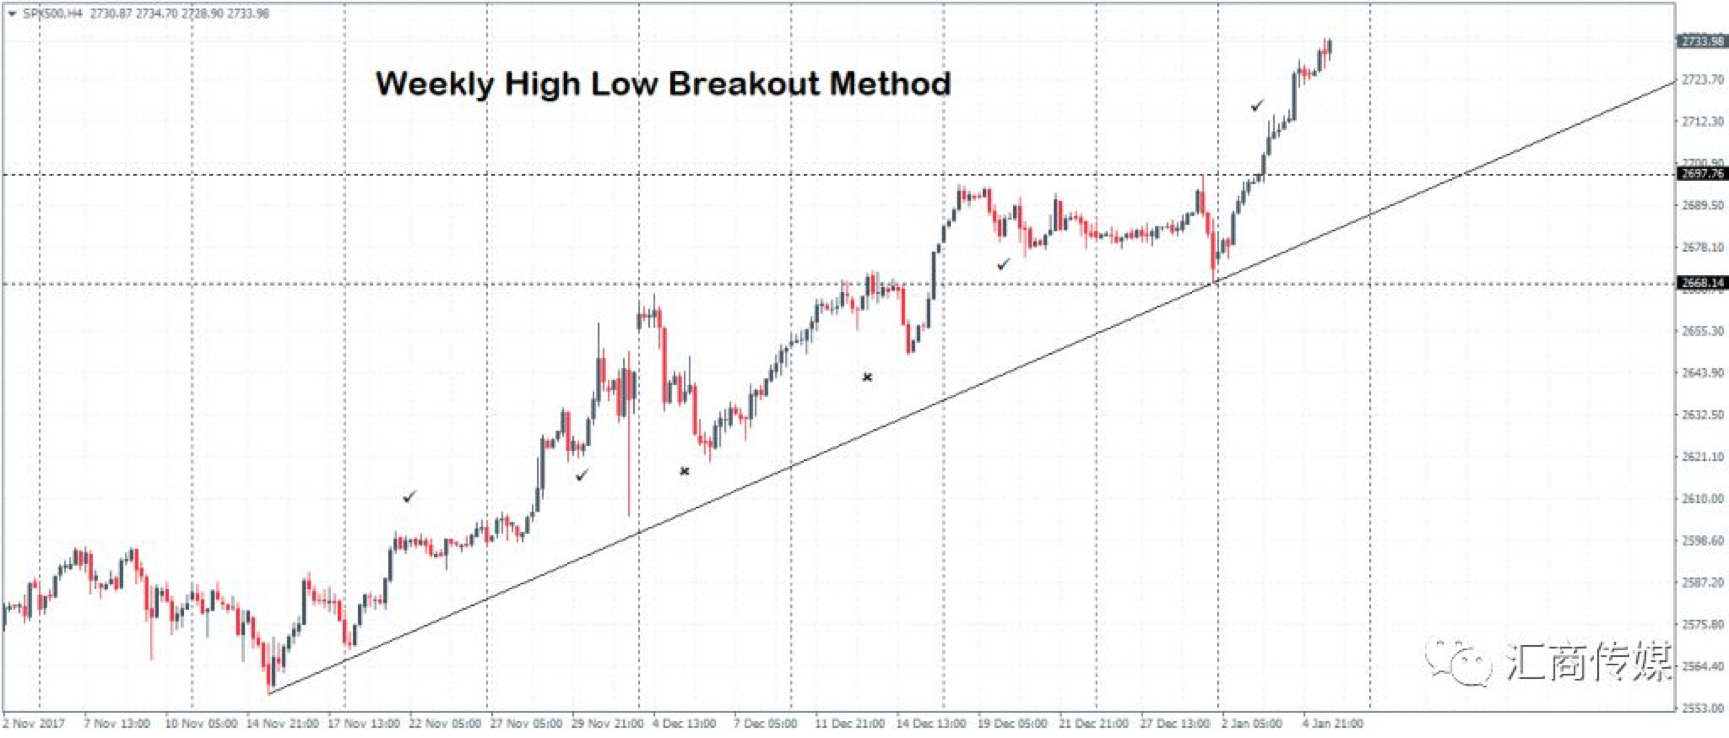 3 Minutes to Understand the Simplest Trading Strategy (1) – Weekly High-low Breakout Method